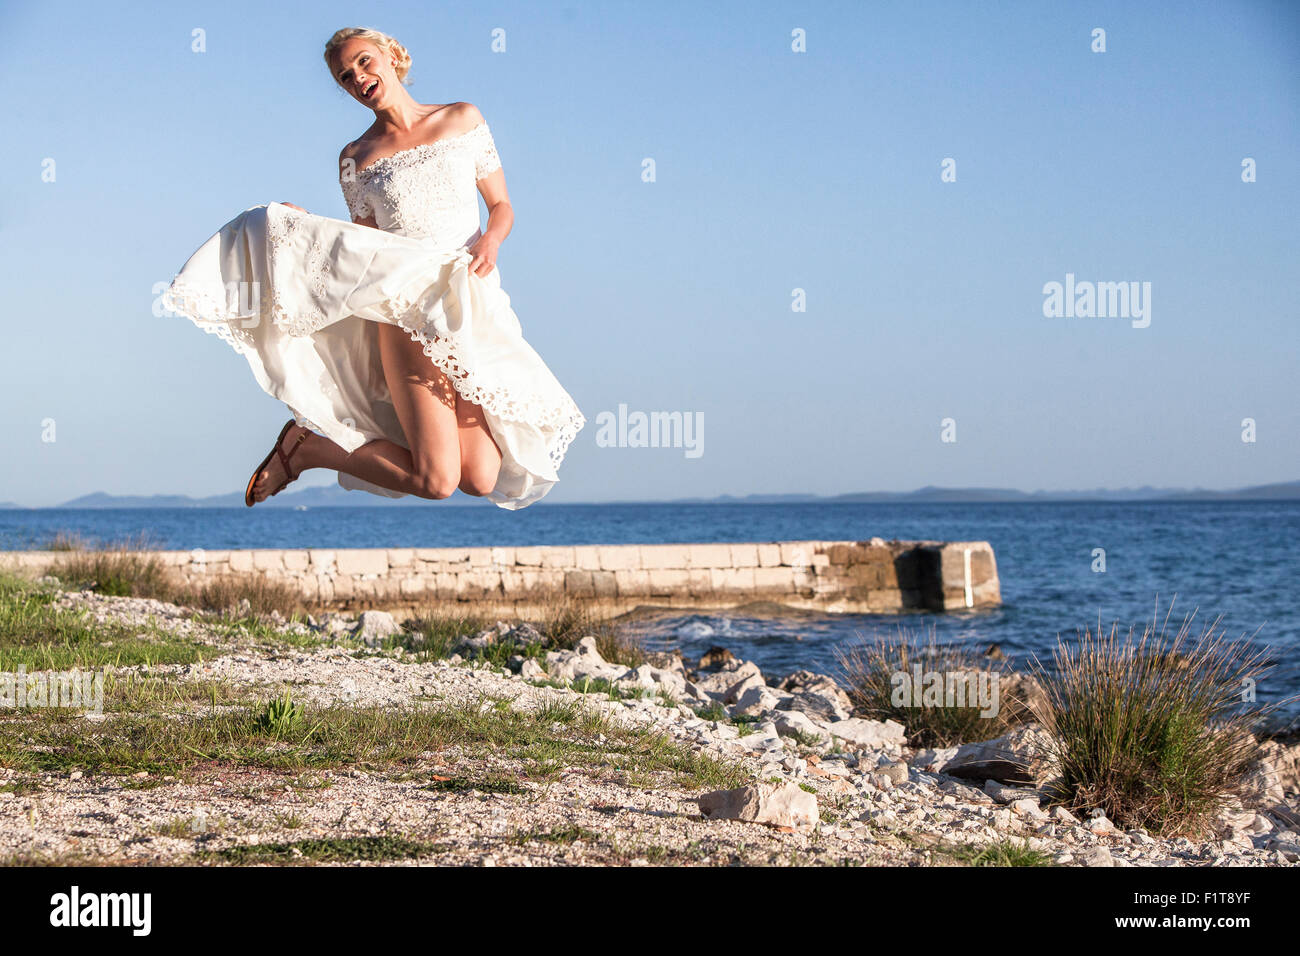 Bride in wedding dress jumping against blue sky Stock Photo